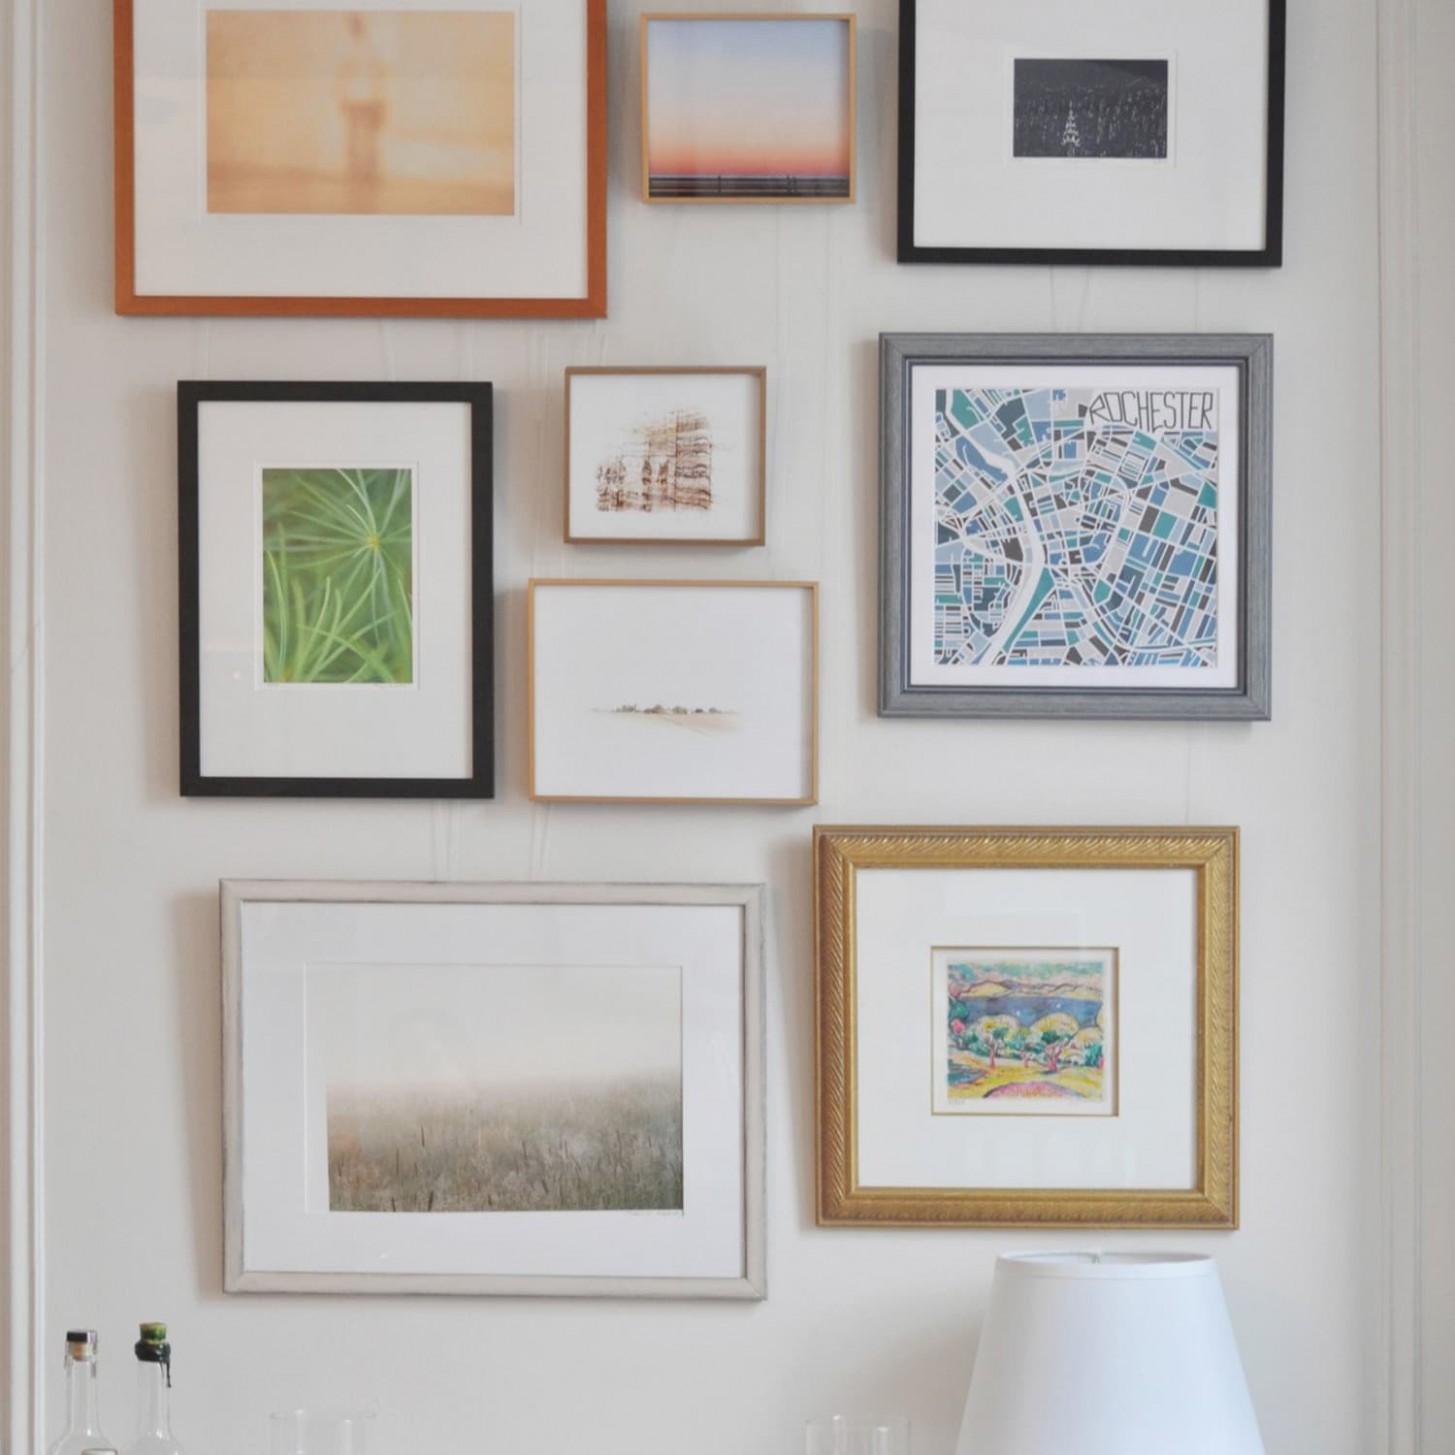 Frugal Living: How To Frame Your Art On The Cheap | Apartment Therapy Art Cles Near Me Cheap